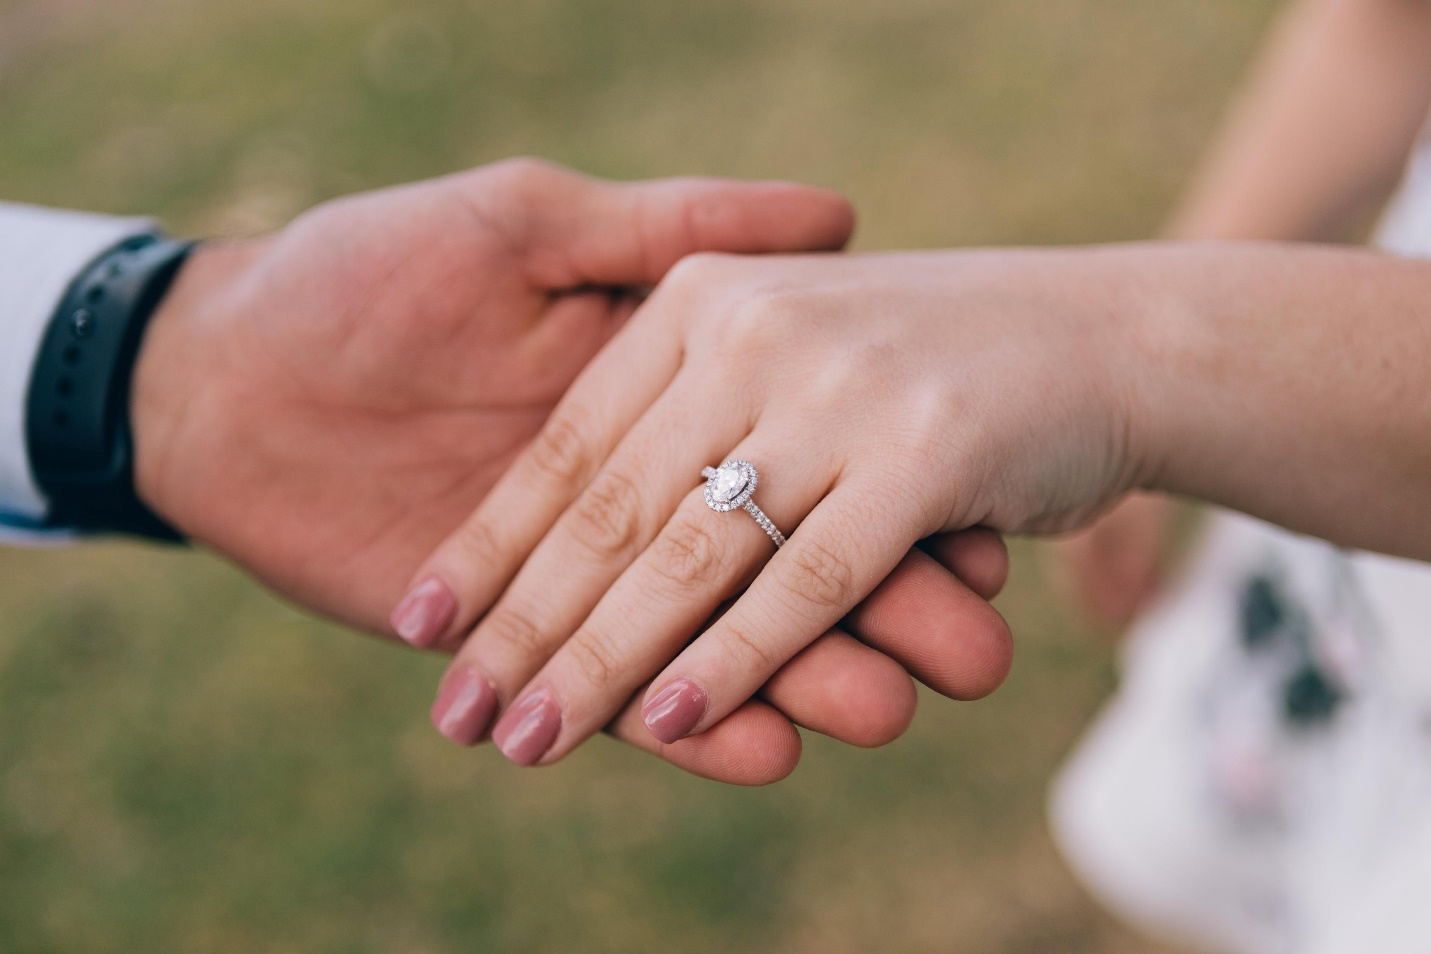 Is There A Best Time To Make A Diamond Ring Purchase?